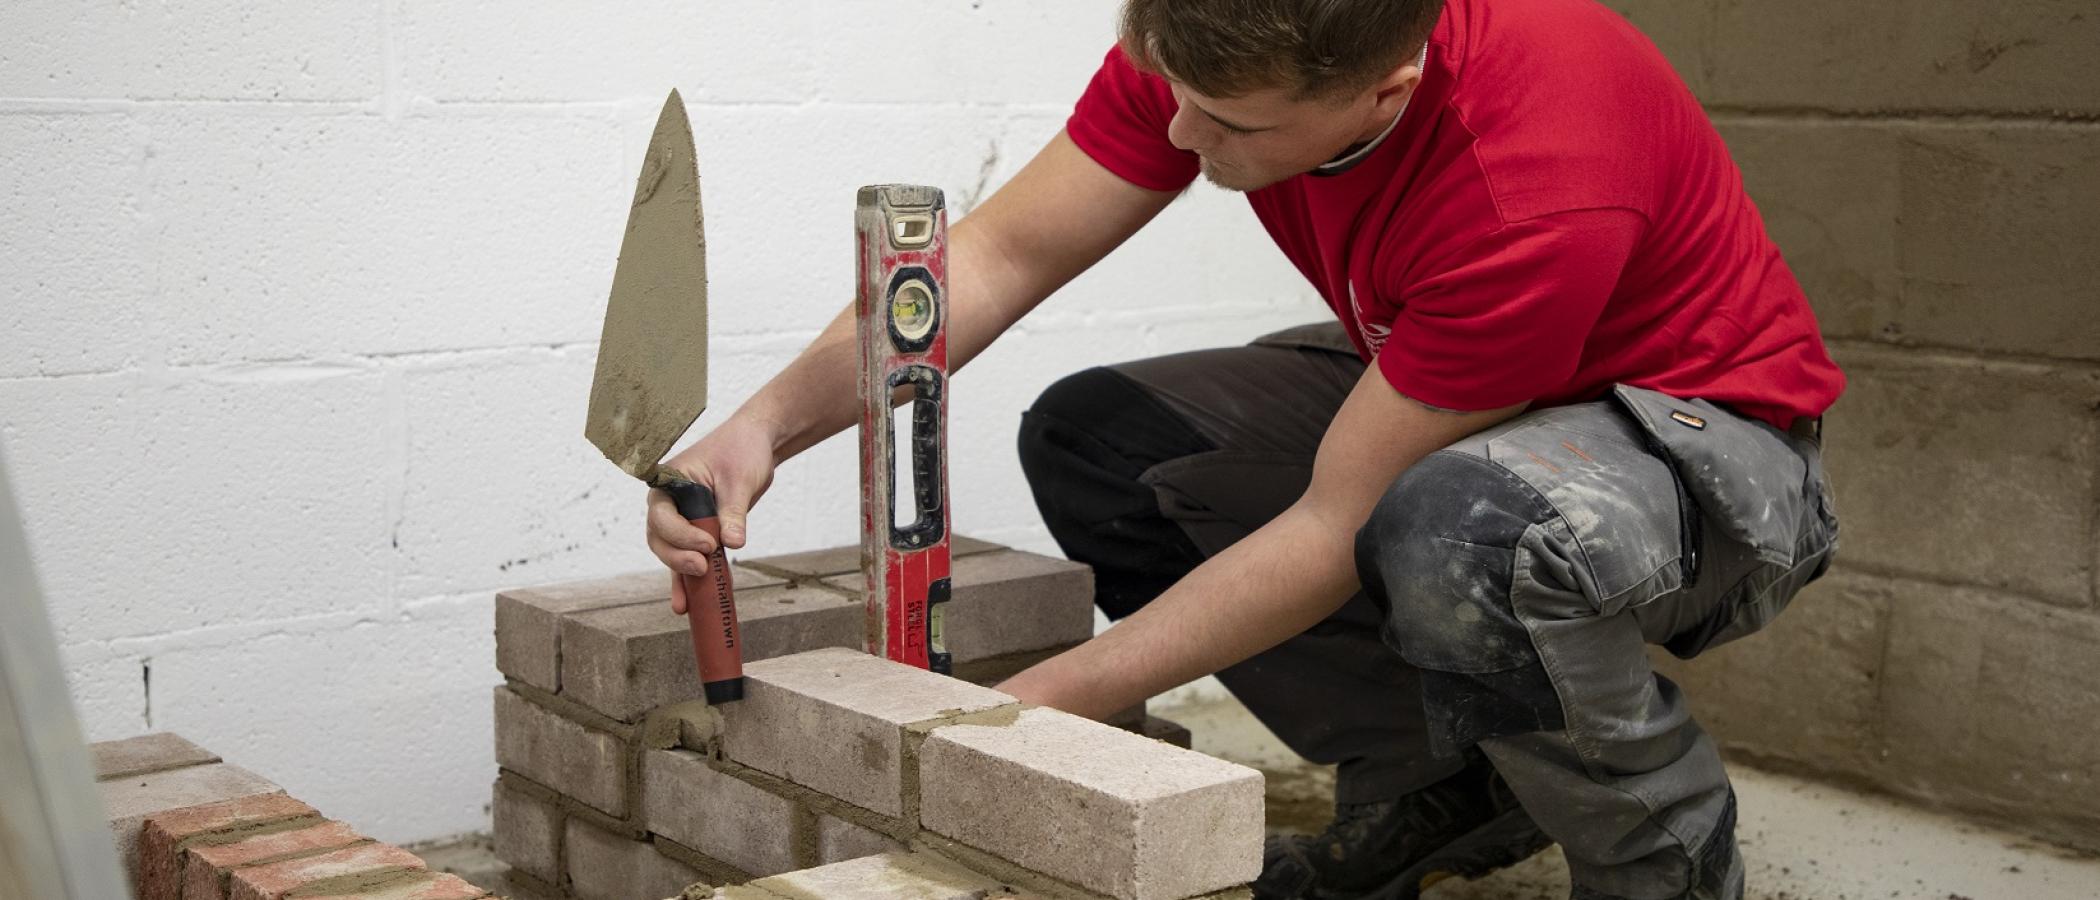 A Built Environment learner building a wall during Skills Competition Wales